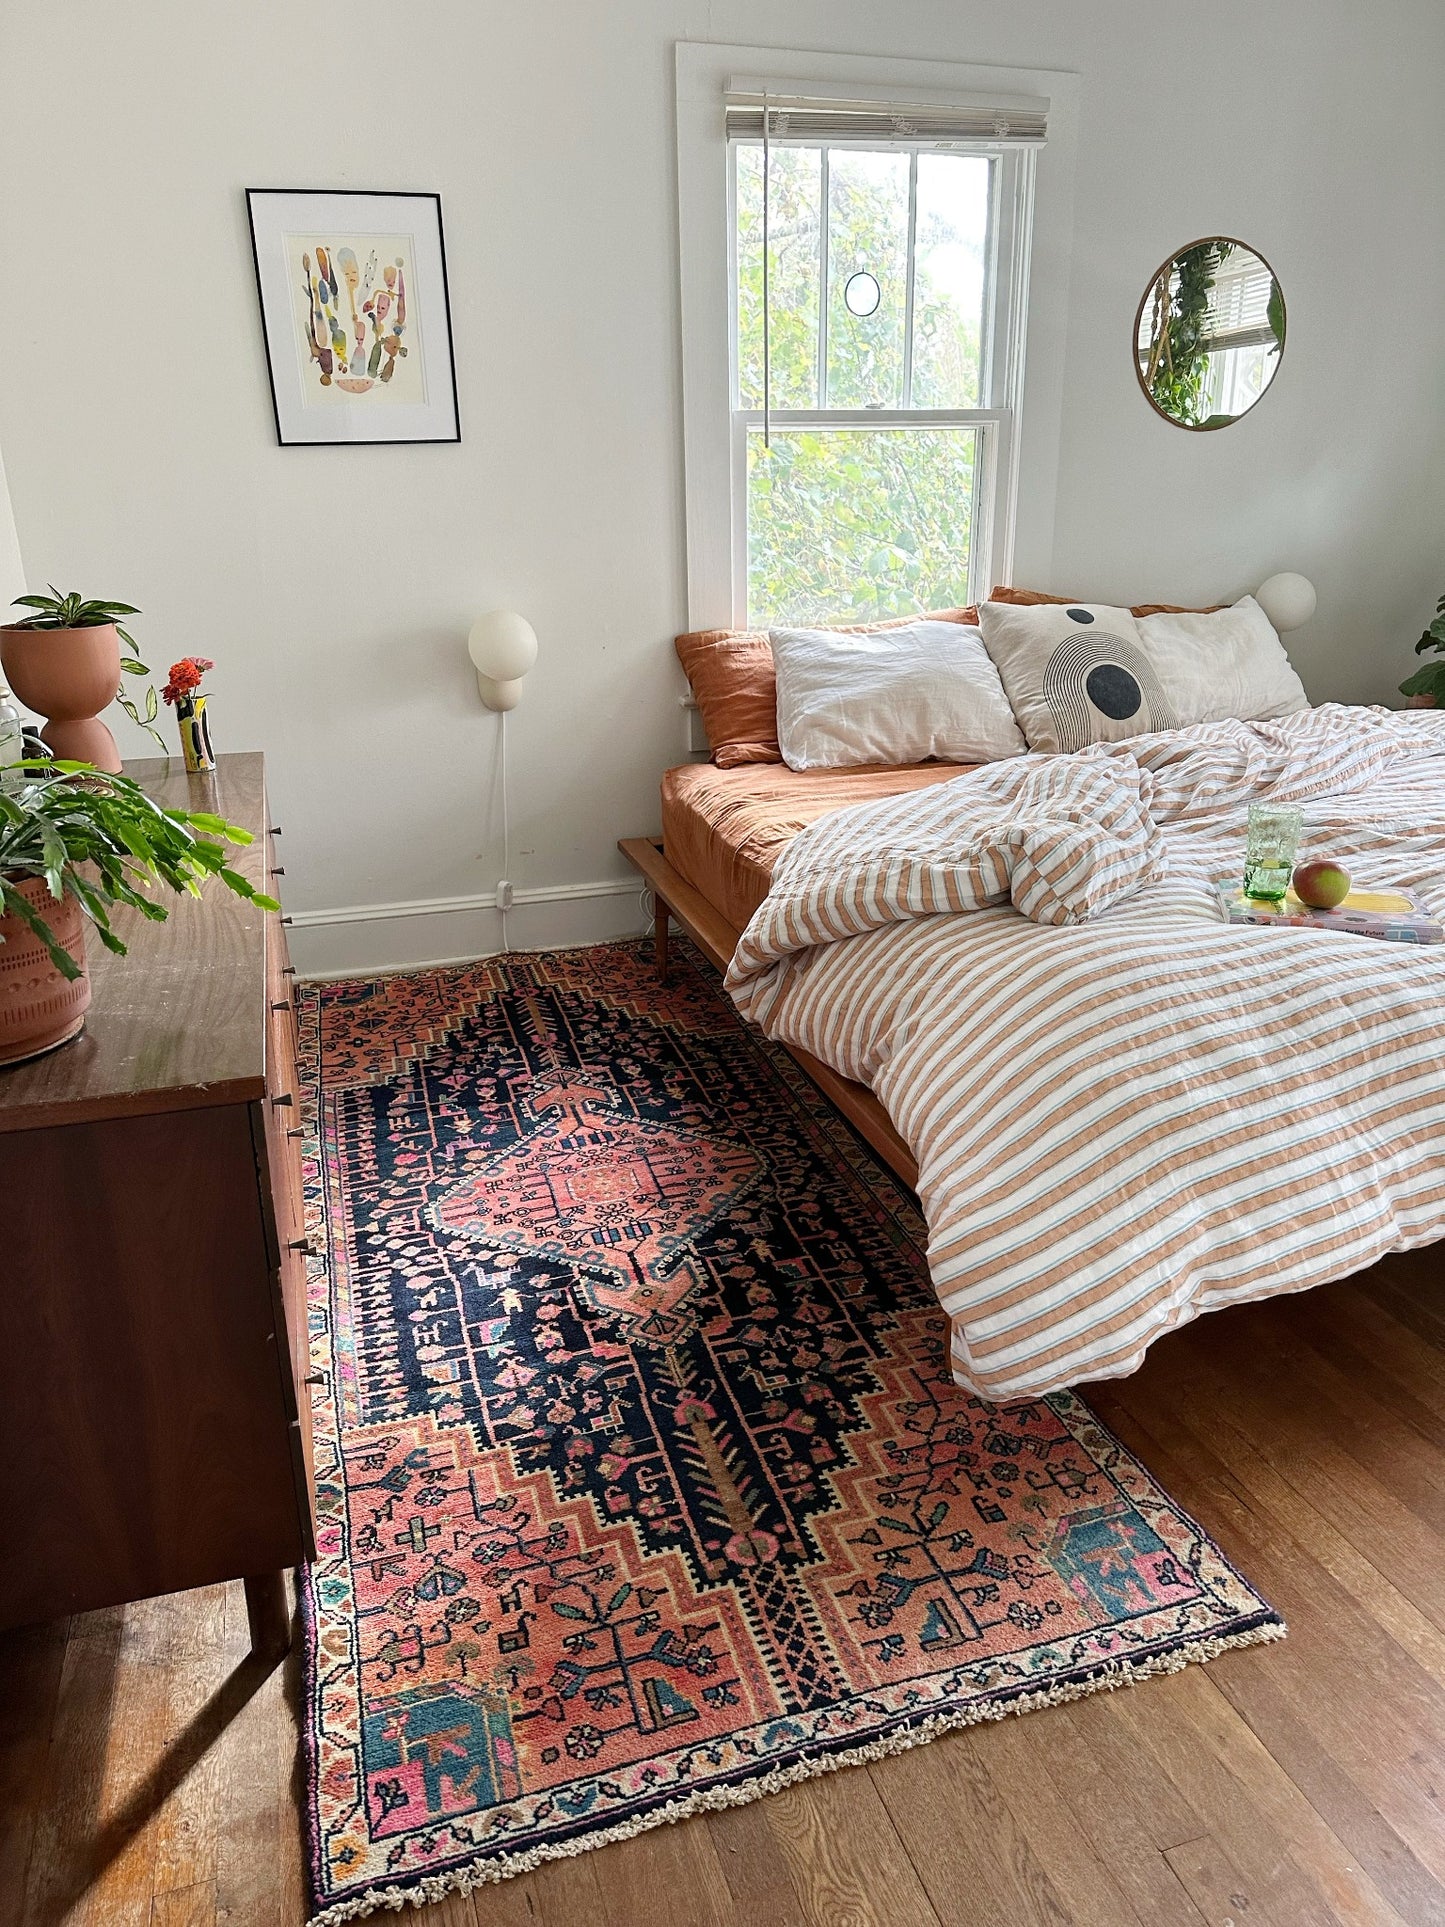 Wreath Persian Rug styled in a bedroom really makes the room pop.